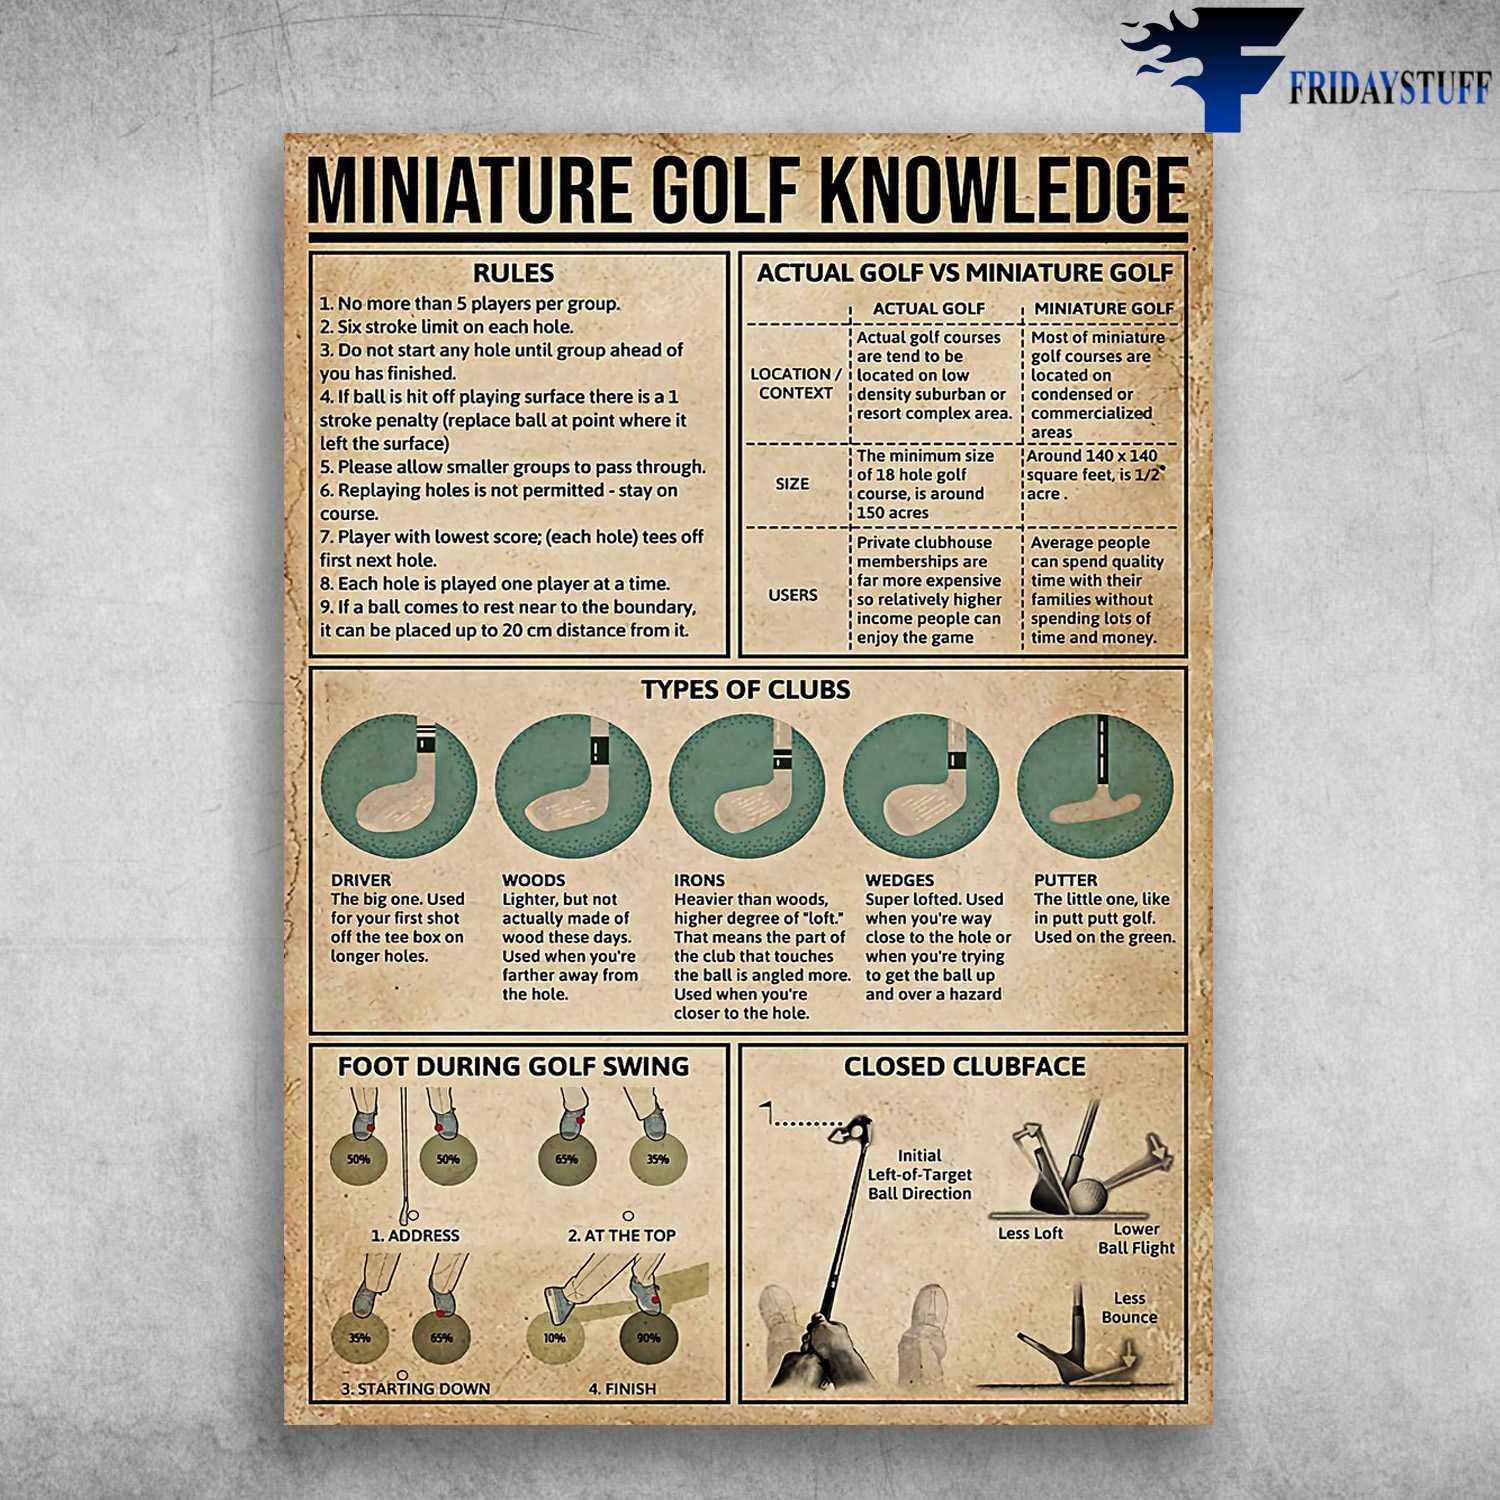 Minature Golf Knowledge - Golf Rules, Actual Golf Vs Minature Golf, Types Of Clubs, Foot During Golf Swing, Closed Clubface